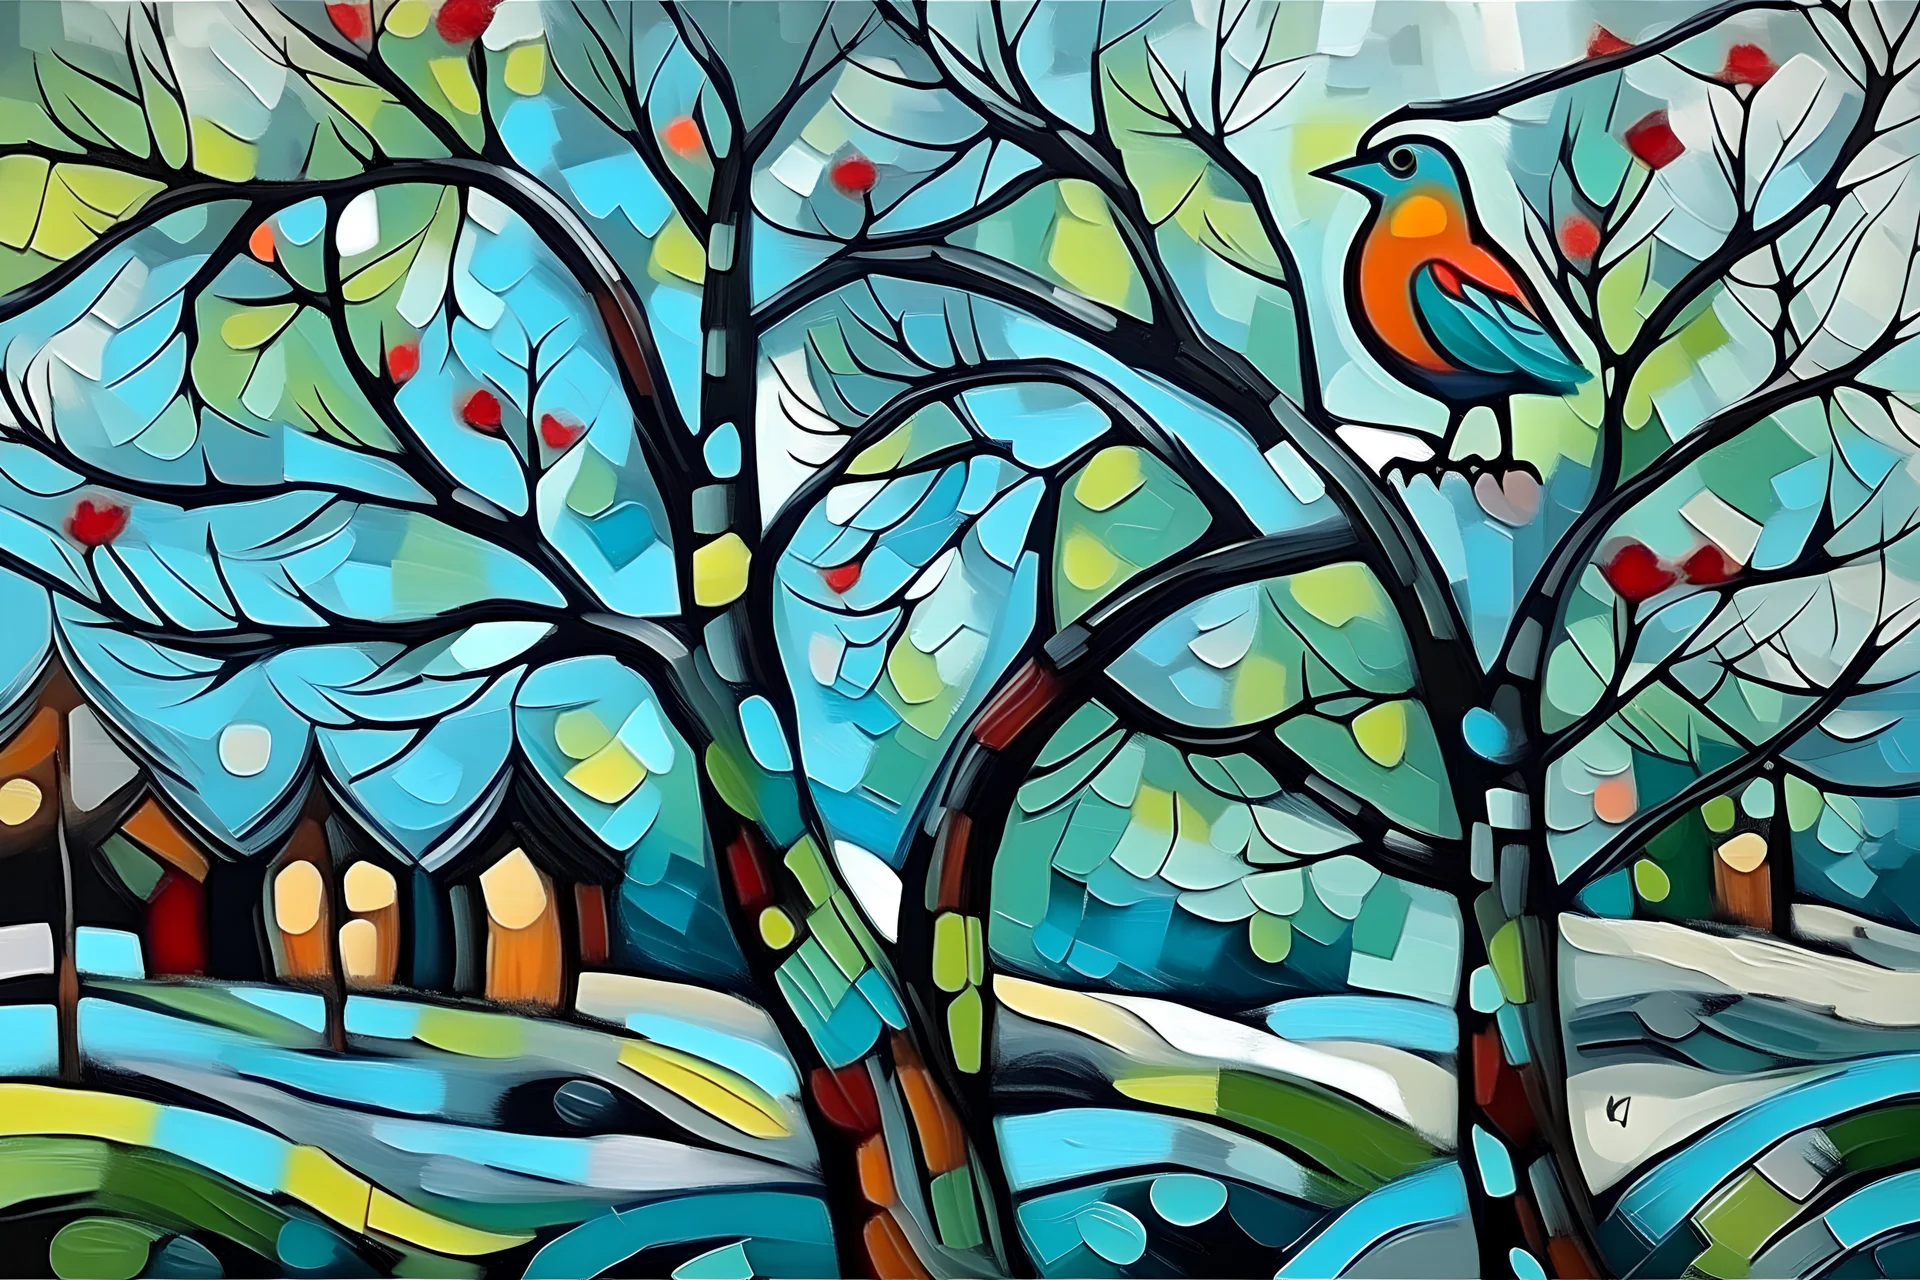 abstract painting style picasso winter joy in lonely tree cold colors bird lake